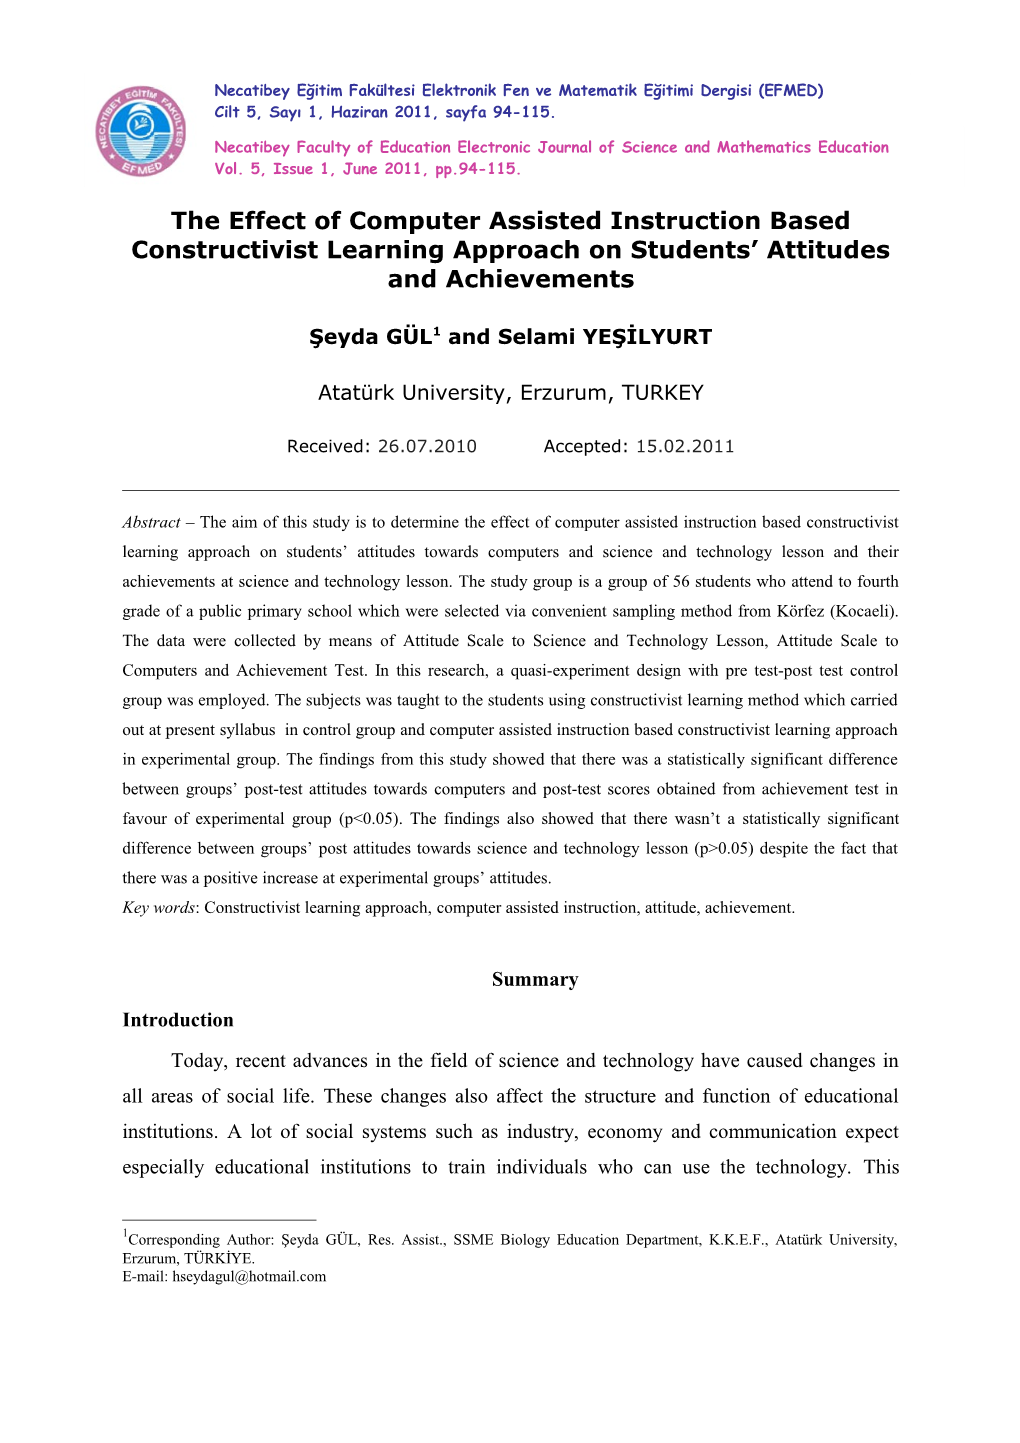 The Effect of Computer Assisted Instruction Based Constructivist Learning Approach On